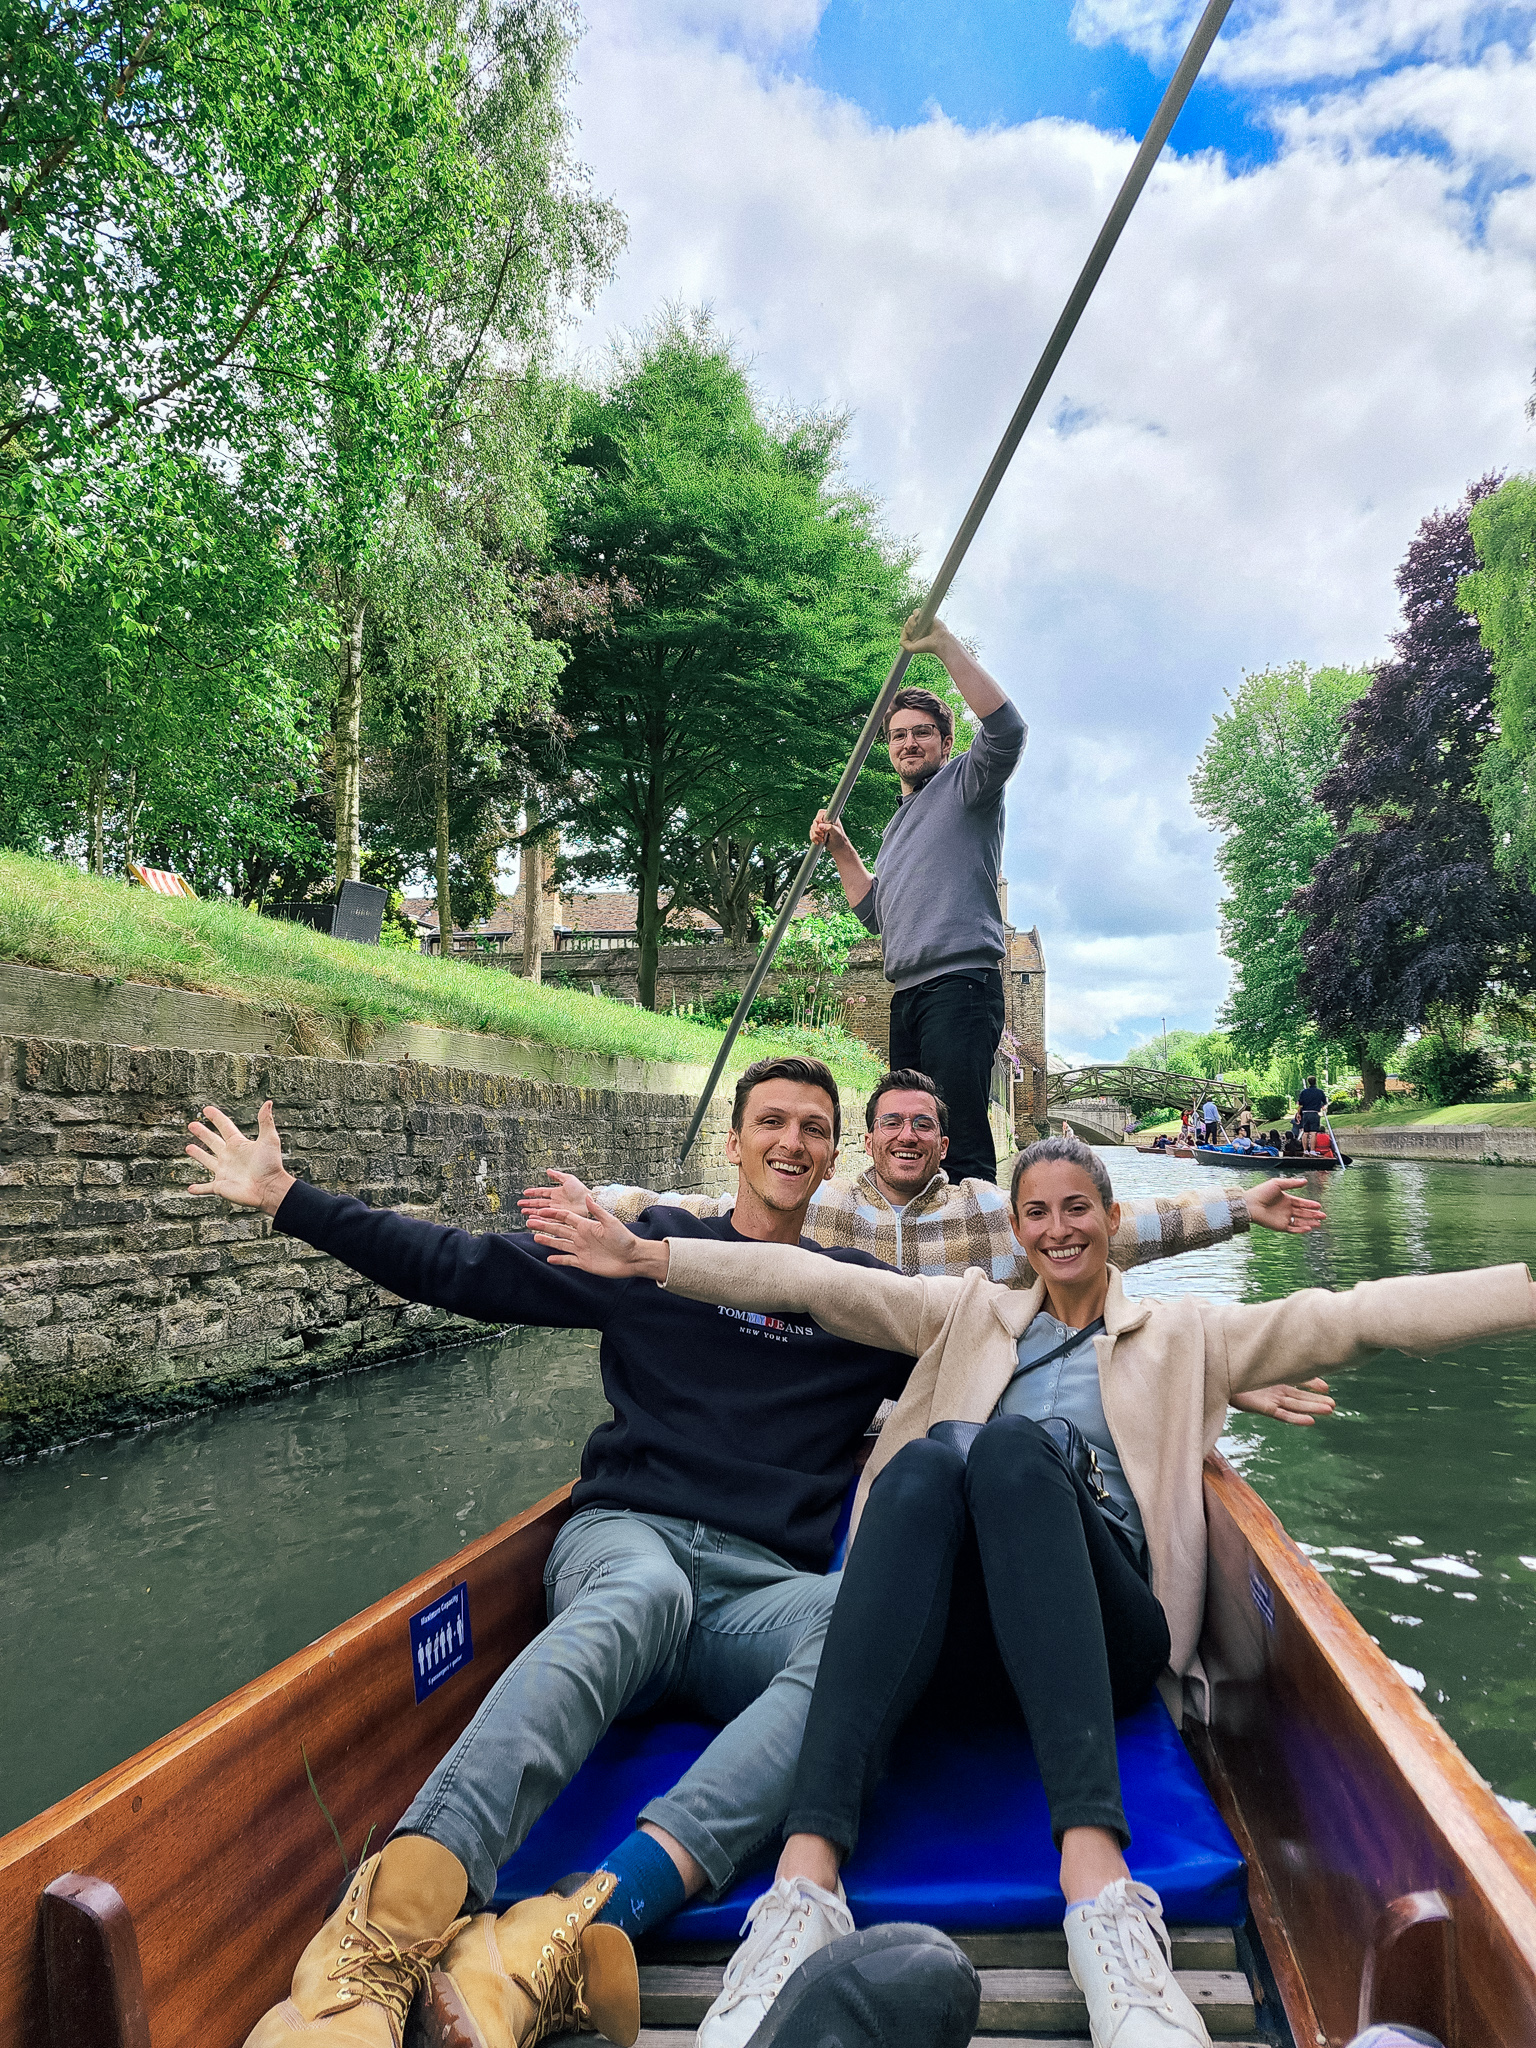 Punting Cambridge things to do